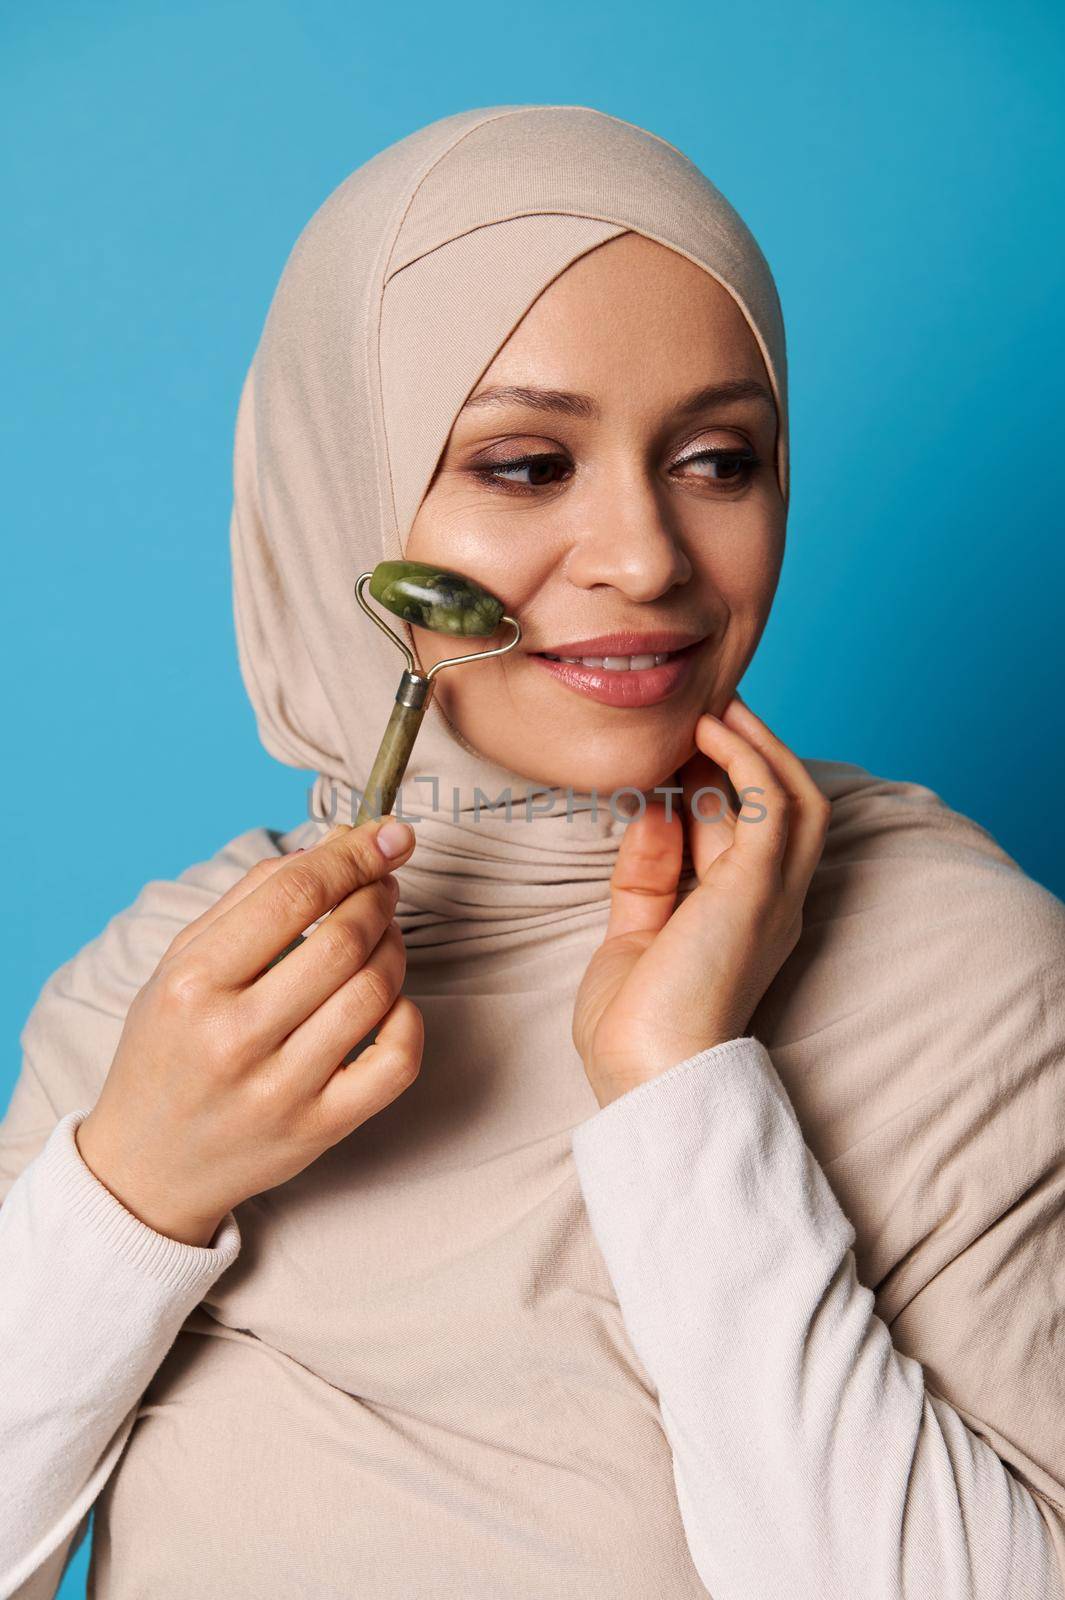 Face beauty portrait of an attractive Arabian woman in hijab and strict religious outfit using jade roller for face lymphatic drainage. Beauty treatment.